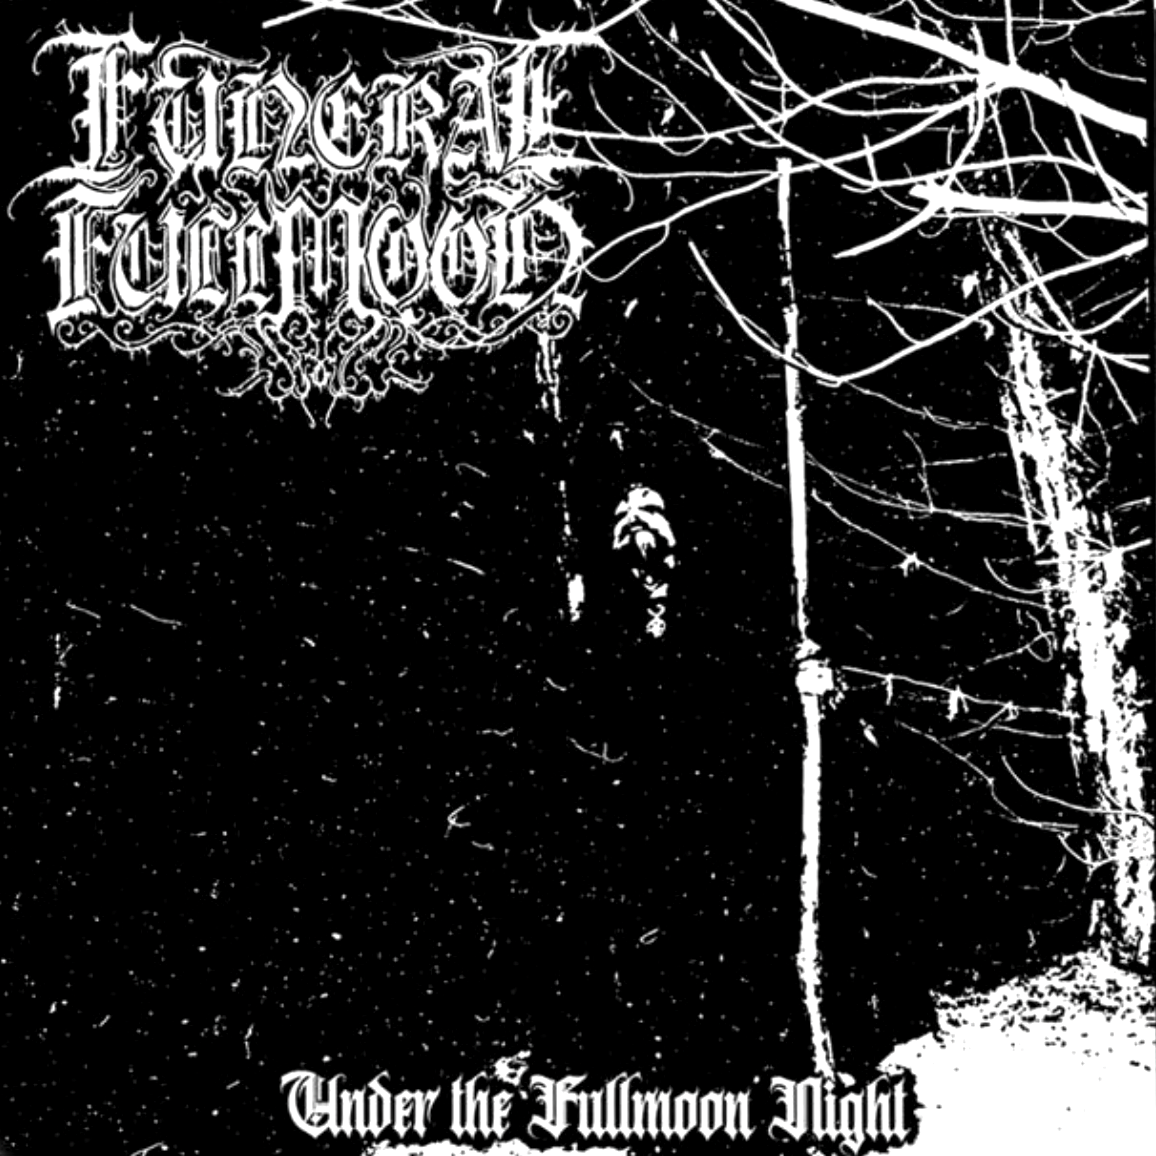 FUNERAL FULLMOON - "Under the Fullmoon Night" LP [SORCERY-020]